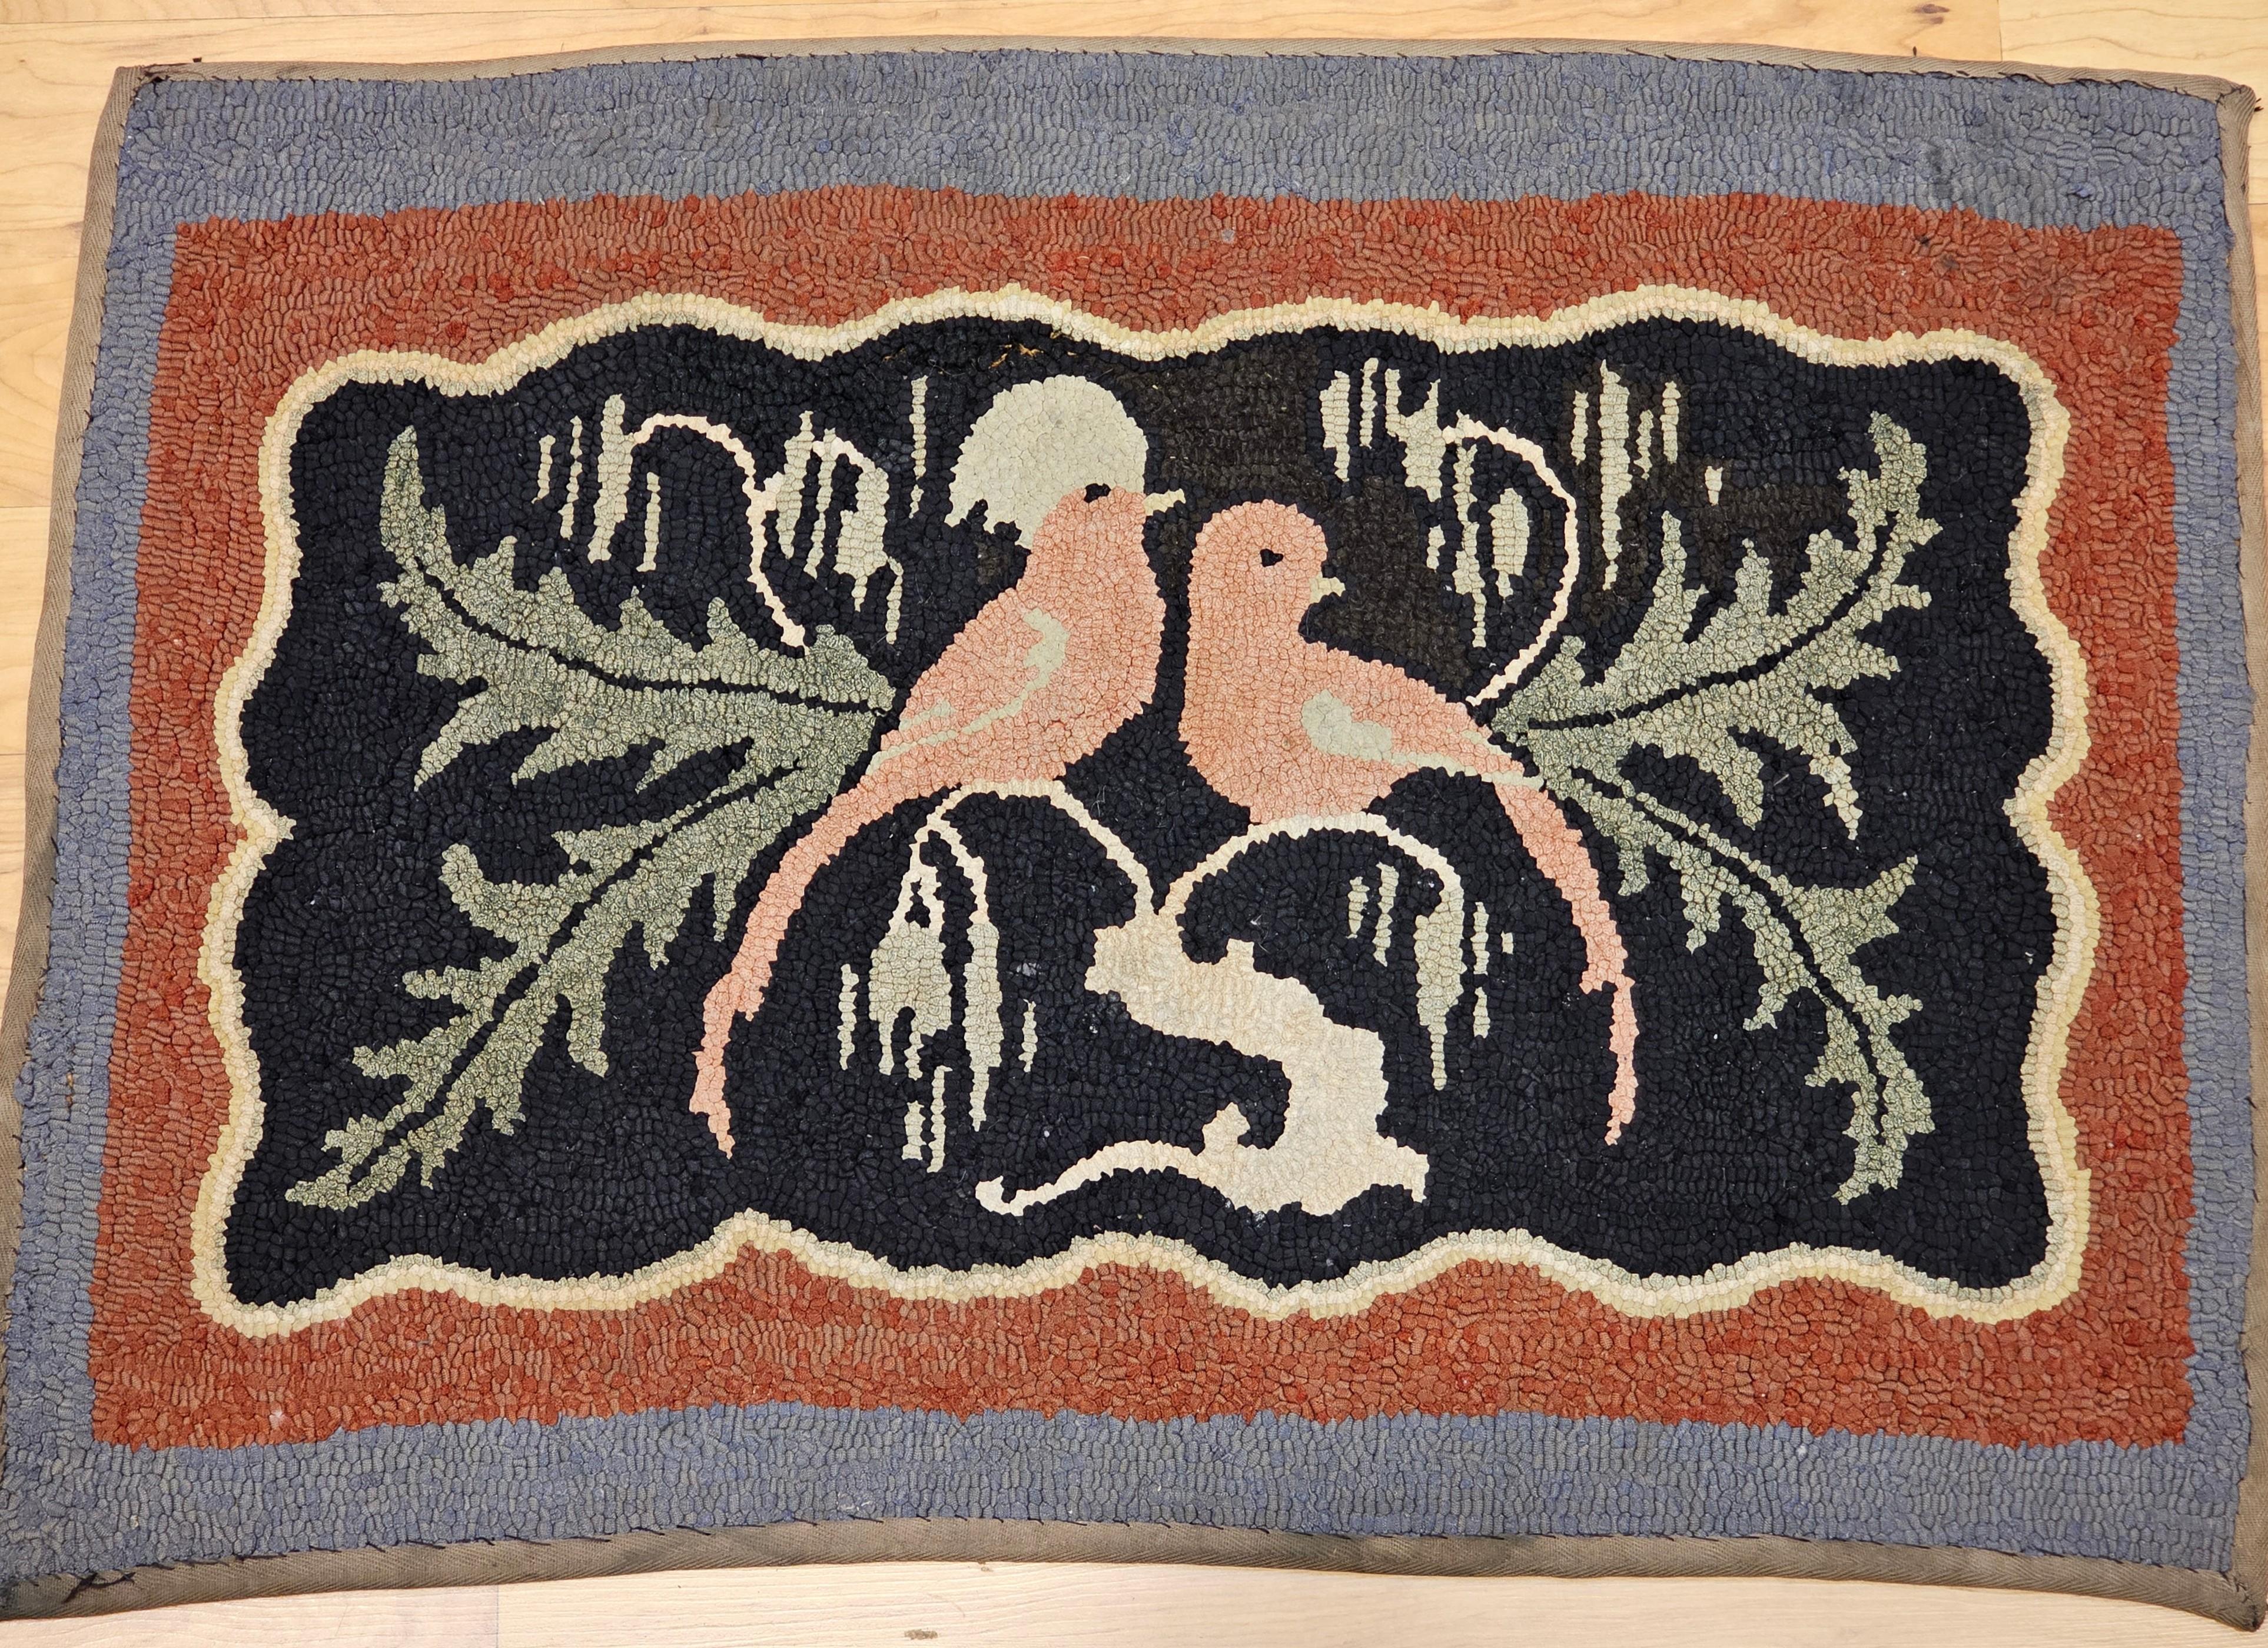  Early 20th Century hand hooked rug in a wonderful depiction of a pair of lovebirds on a tree branch.  The rug has a delightful design and colors including black, ivory, lavender pink, green, and rust red.    We are intrigued with the novelty and